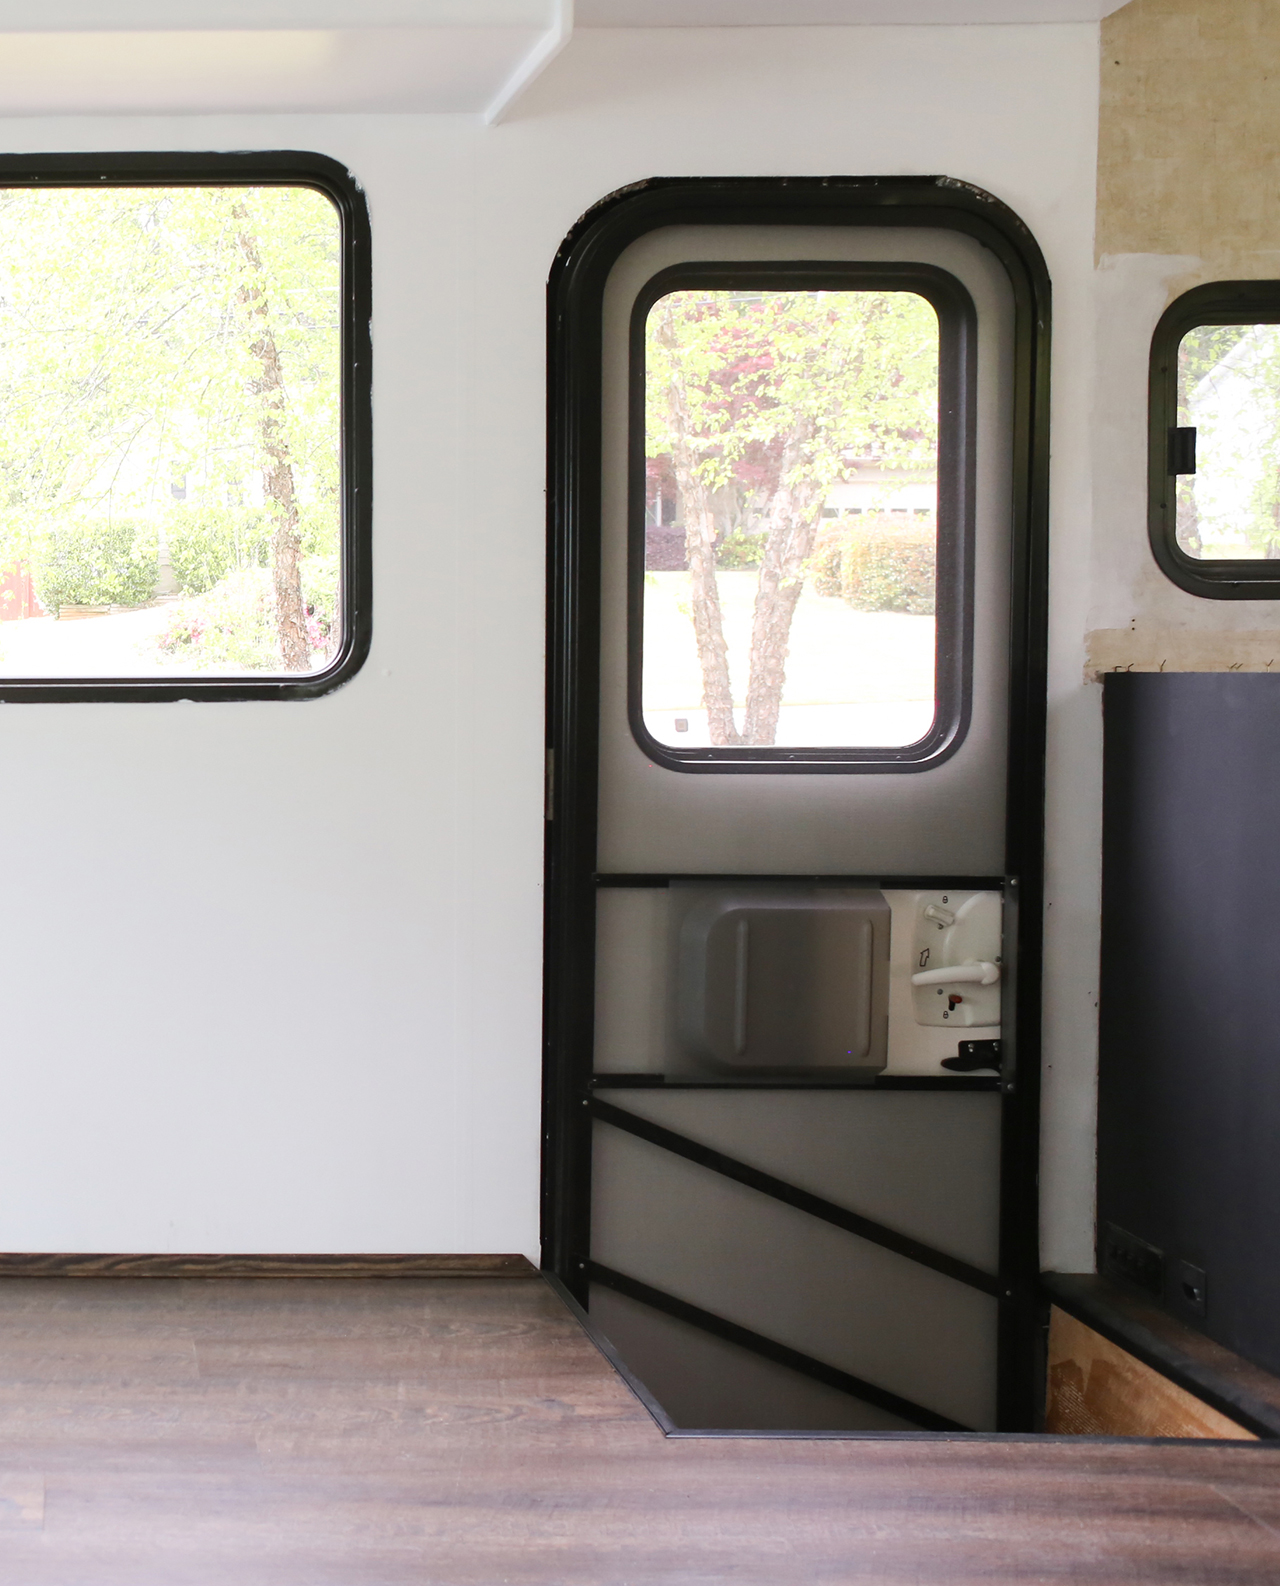 How to Paint the Walls of Your RV